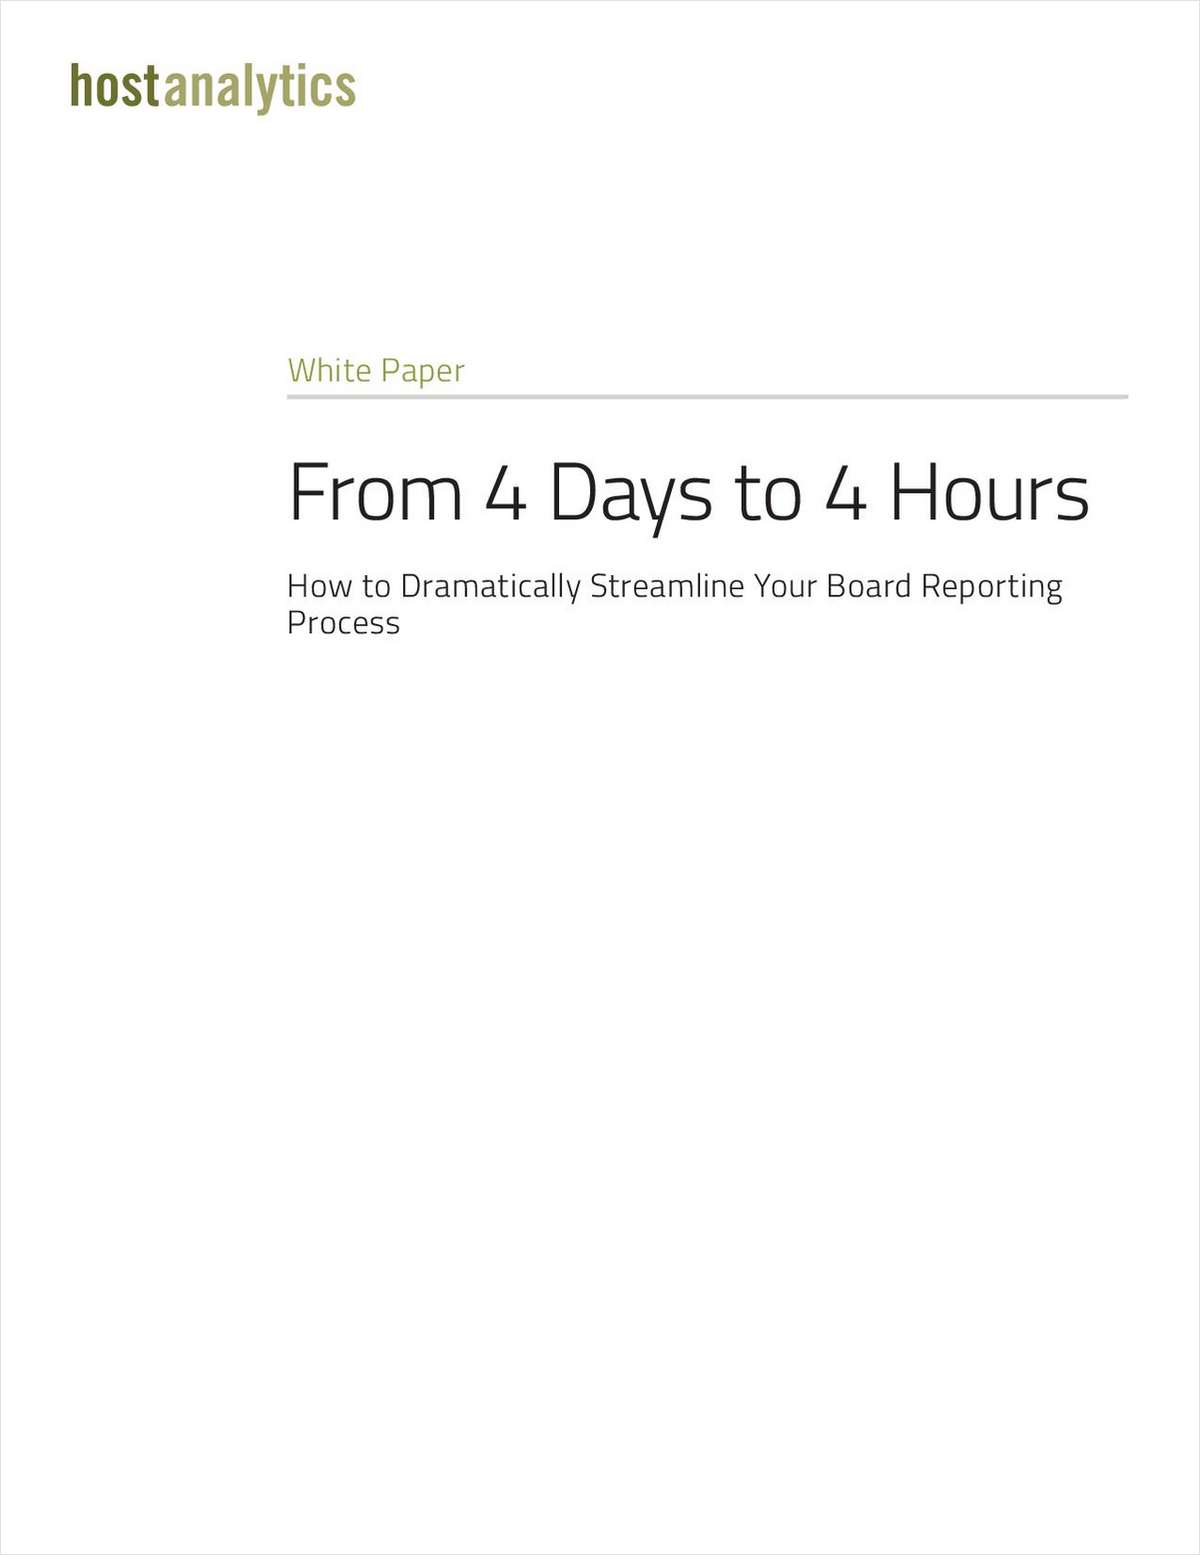 From 4 Days to 4 Hours: How to Dramatically Streamline Your Board Reporting Process